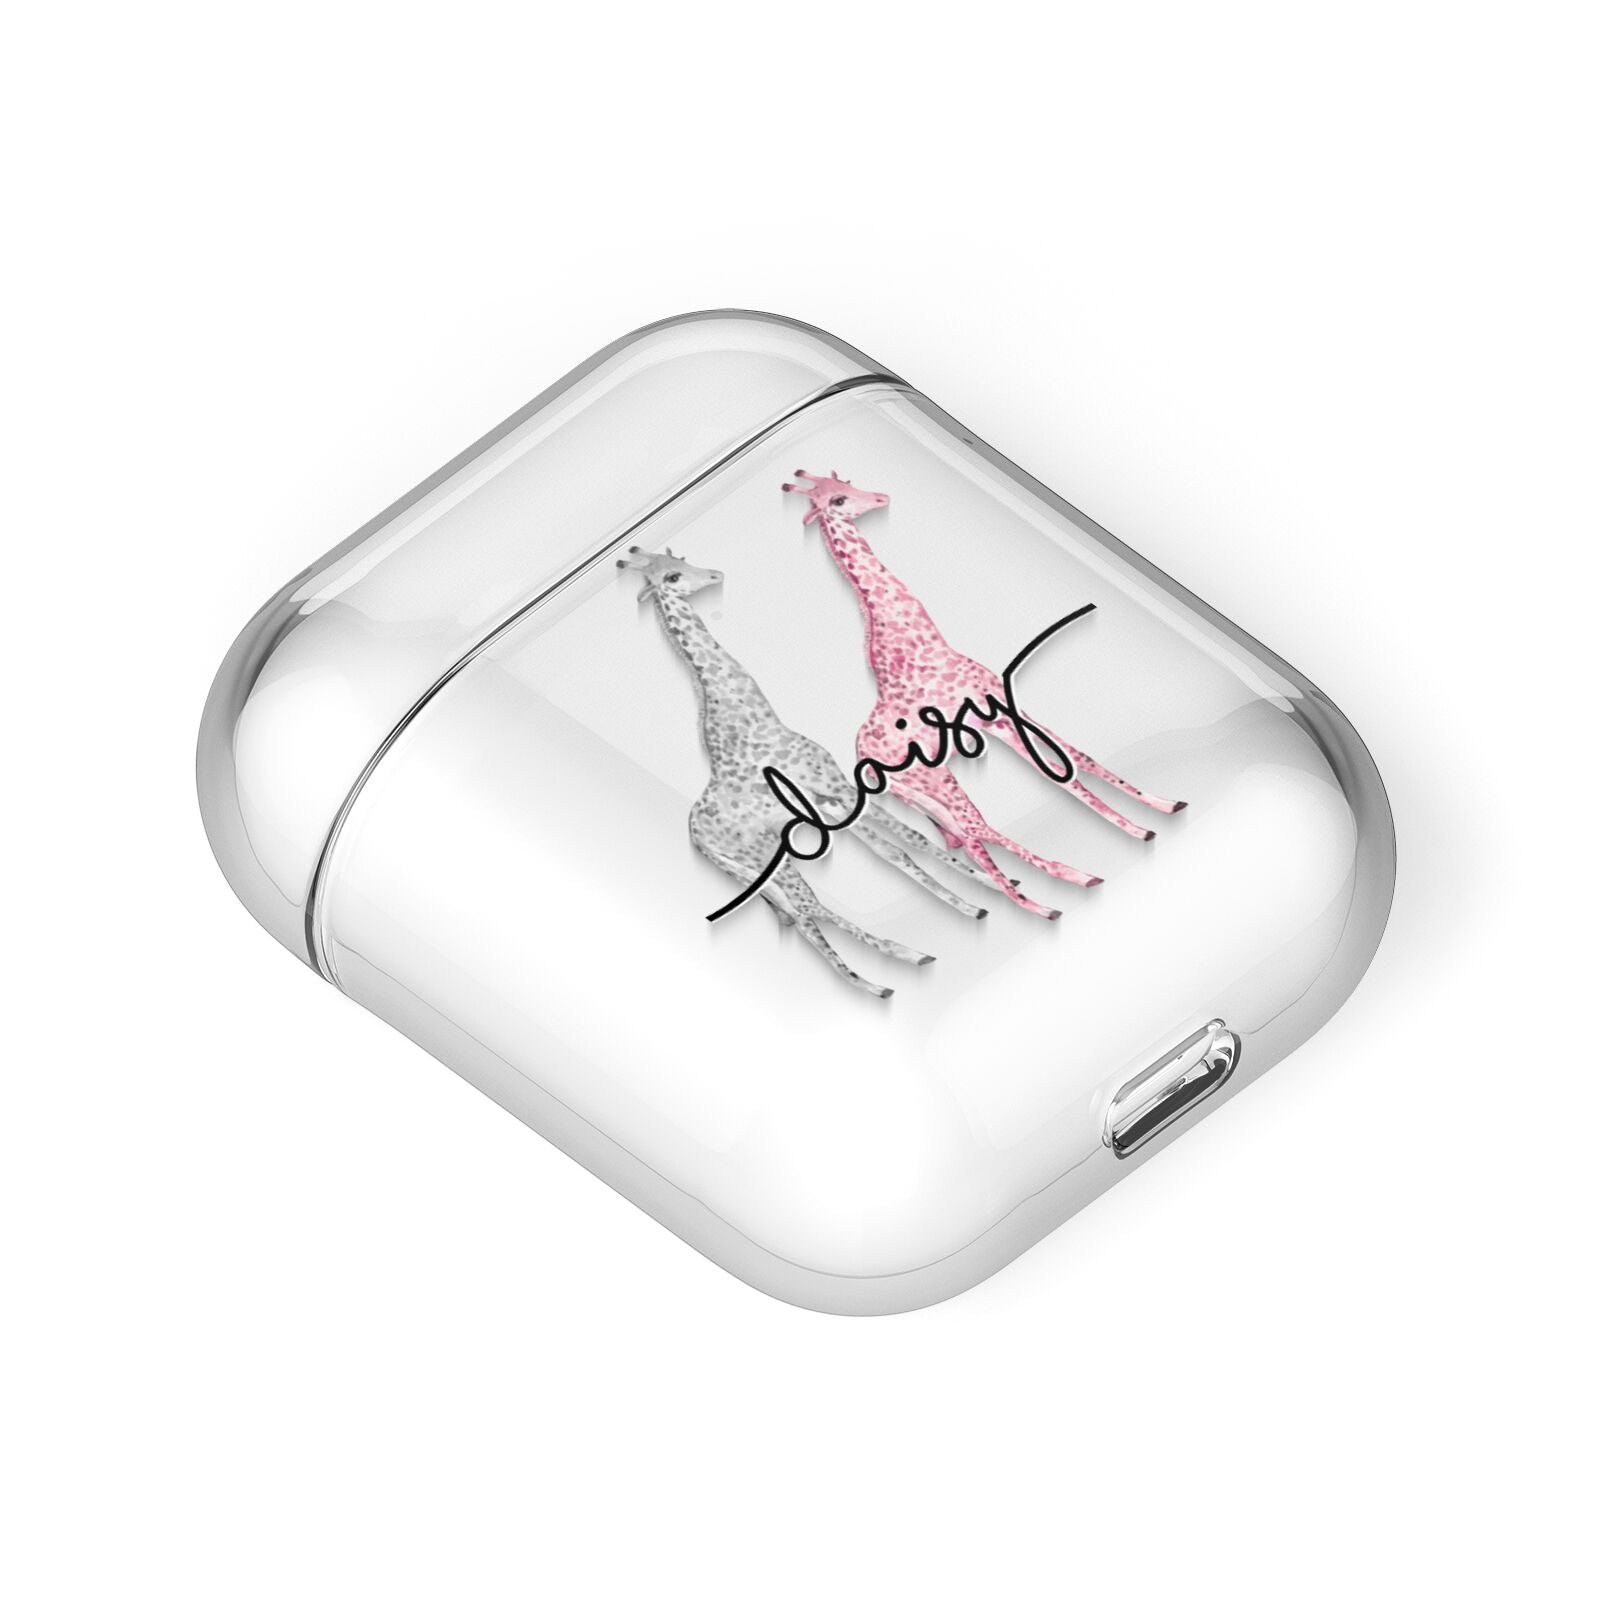 Personalised Pink Grey Giraffes AirPods Case Laid Flat